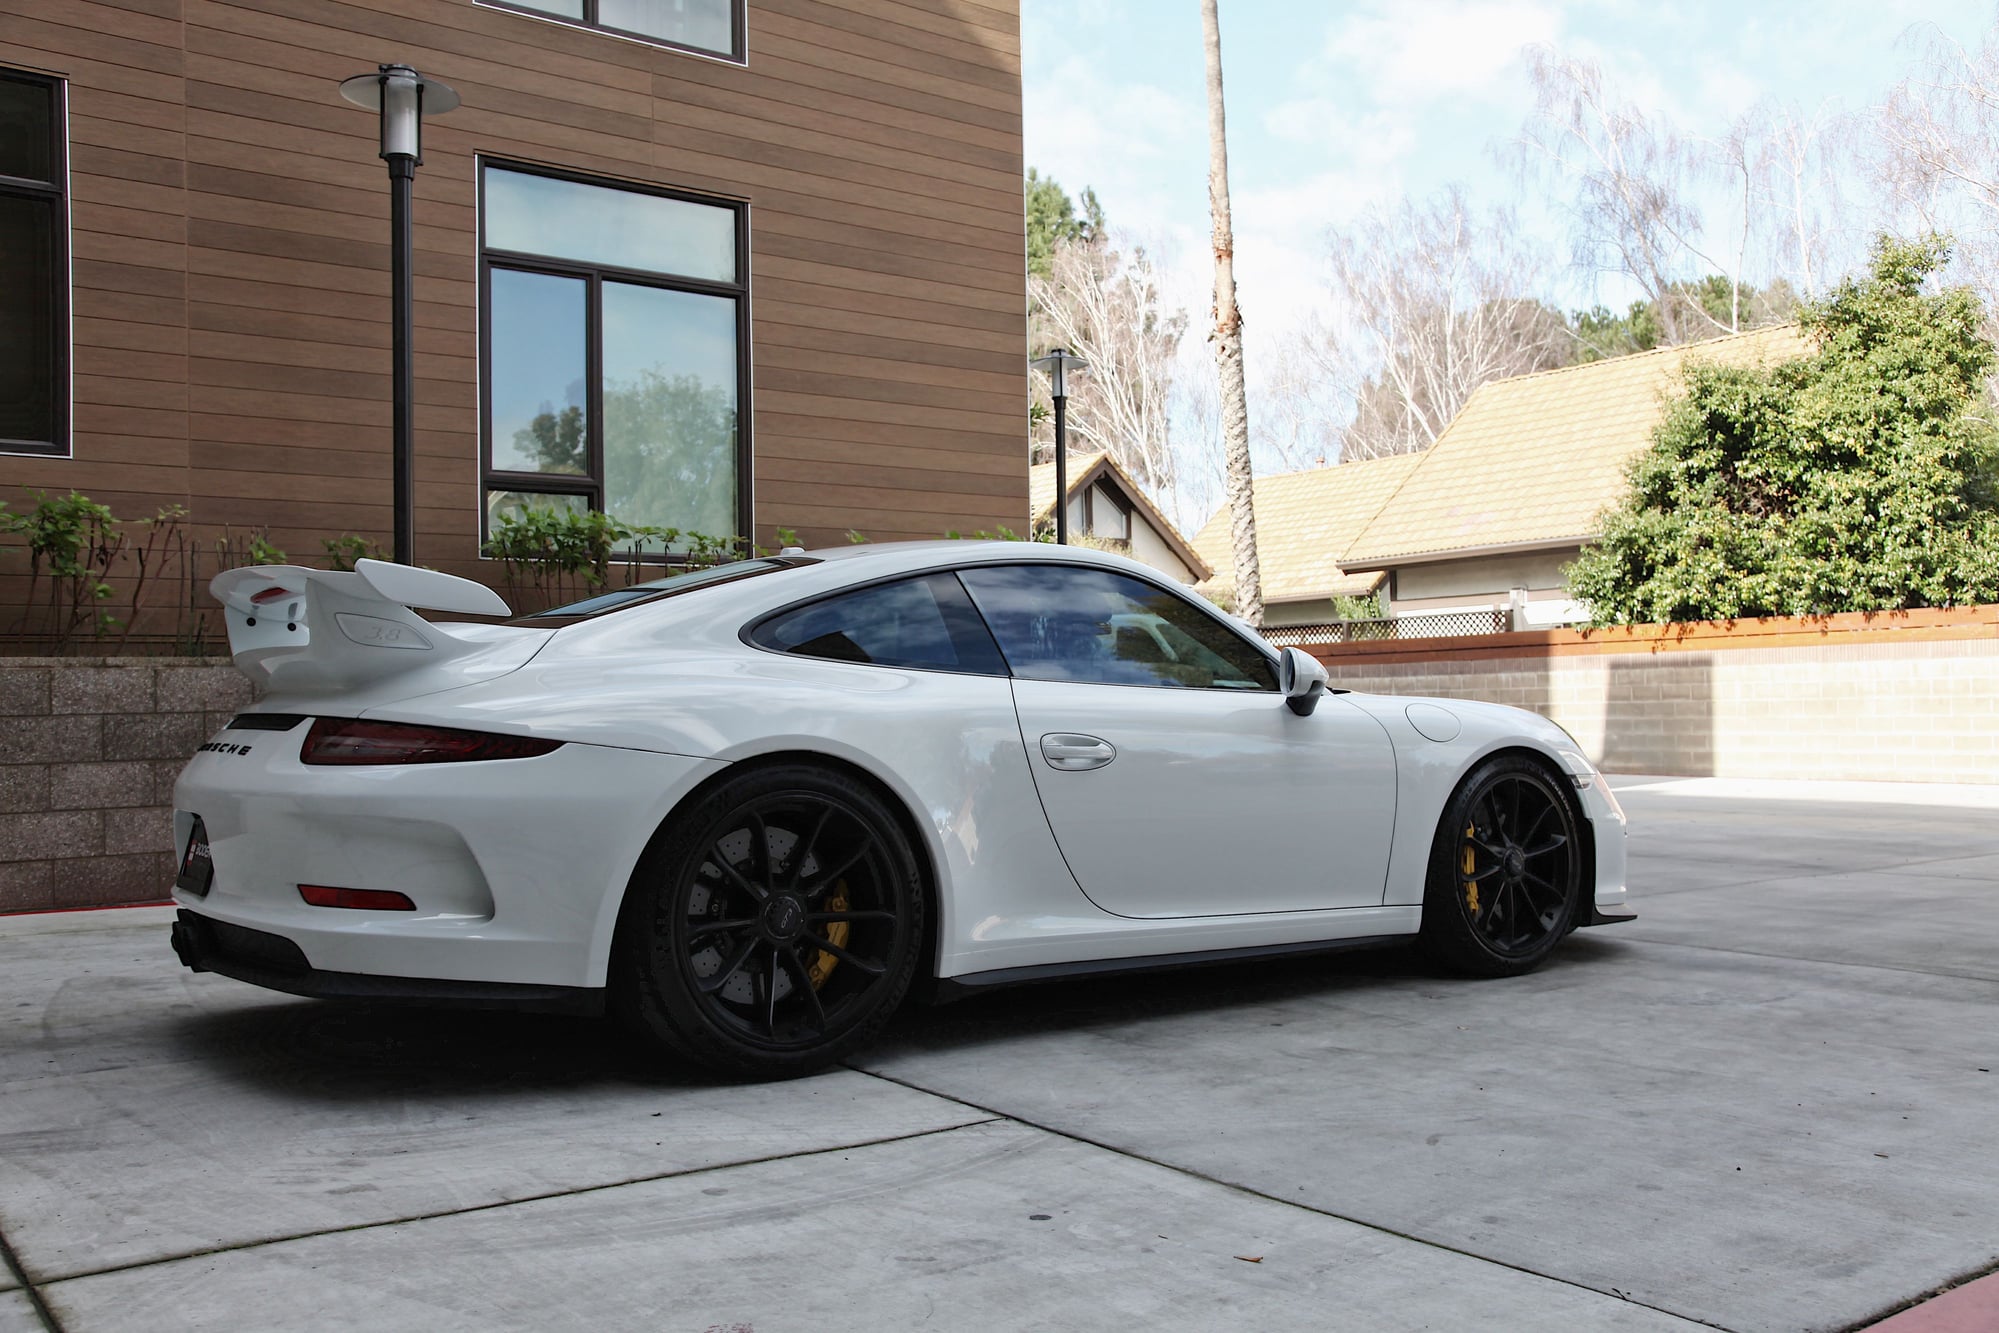 2016 Porsche GT3 - FS: 2016 911 GT3: $172K MSRP + $13K adds, White, LWB, PCCB, Lift, Full XPEL, Pepita - Used - VIN WP0AC2A94GS184099 - 7,569 Miles - 6 cyl - 2WD - Automatic - Coupe - White - Norcal, CA 94043, United States